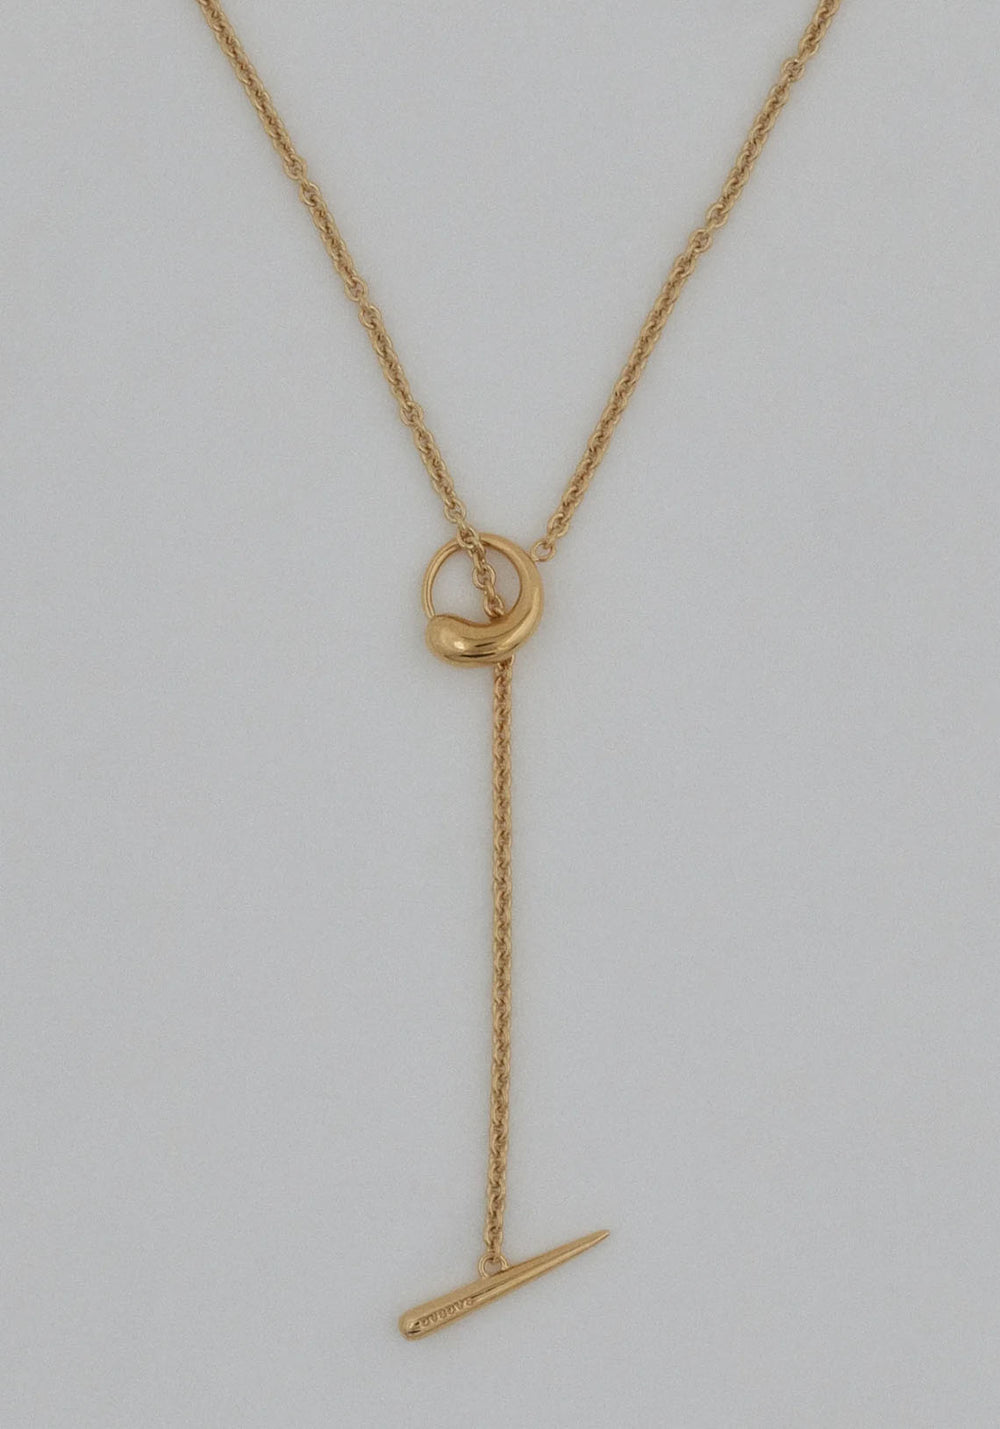 OCULUS 15026 BRASS WITH 18K GOLD PLATING NECKLACE